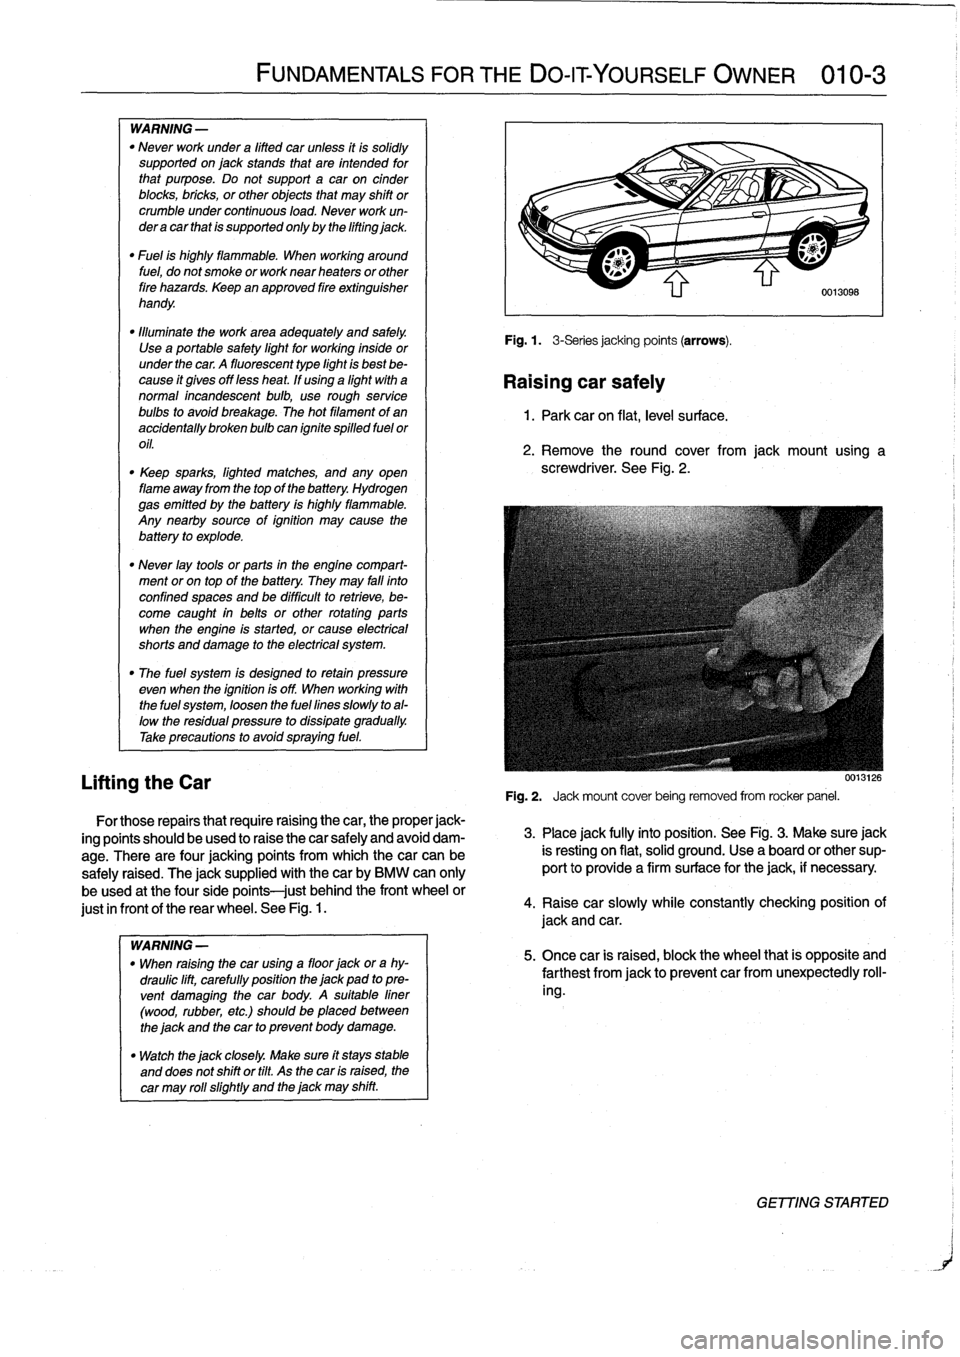 BMW 323i 1998 E36 Workshop Manual 
WARNING
-

"
Never
work
under
a
lifted
car
unless
it
is
solidly
supported
on
jack
stands
that
are
intended
for
that
purpose
.
Do
not
support
a
car
on
cinder
blocks,
bricks,
or
other
objects
that
may
